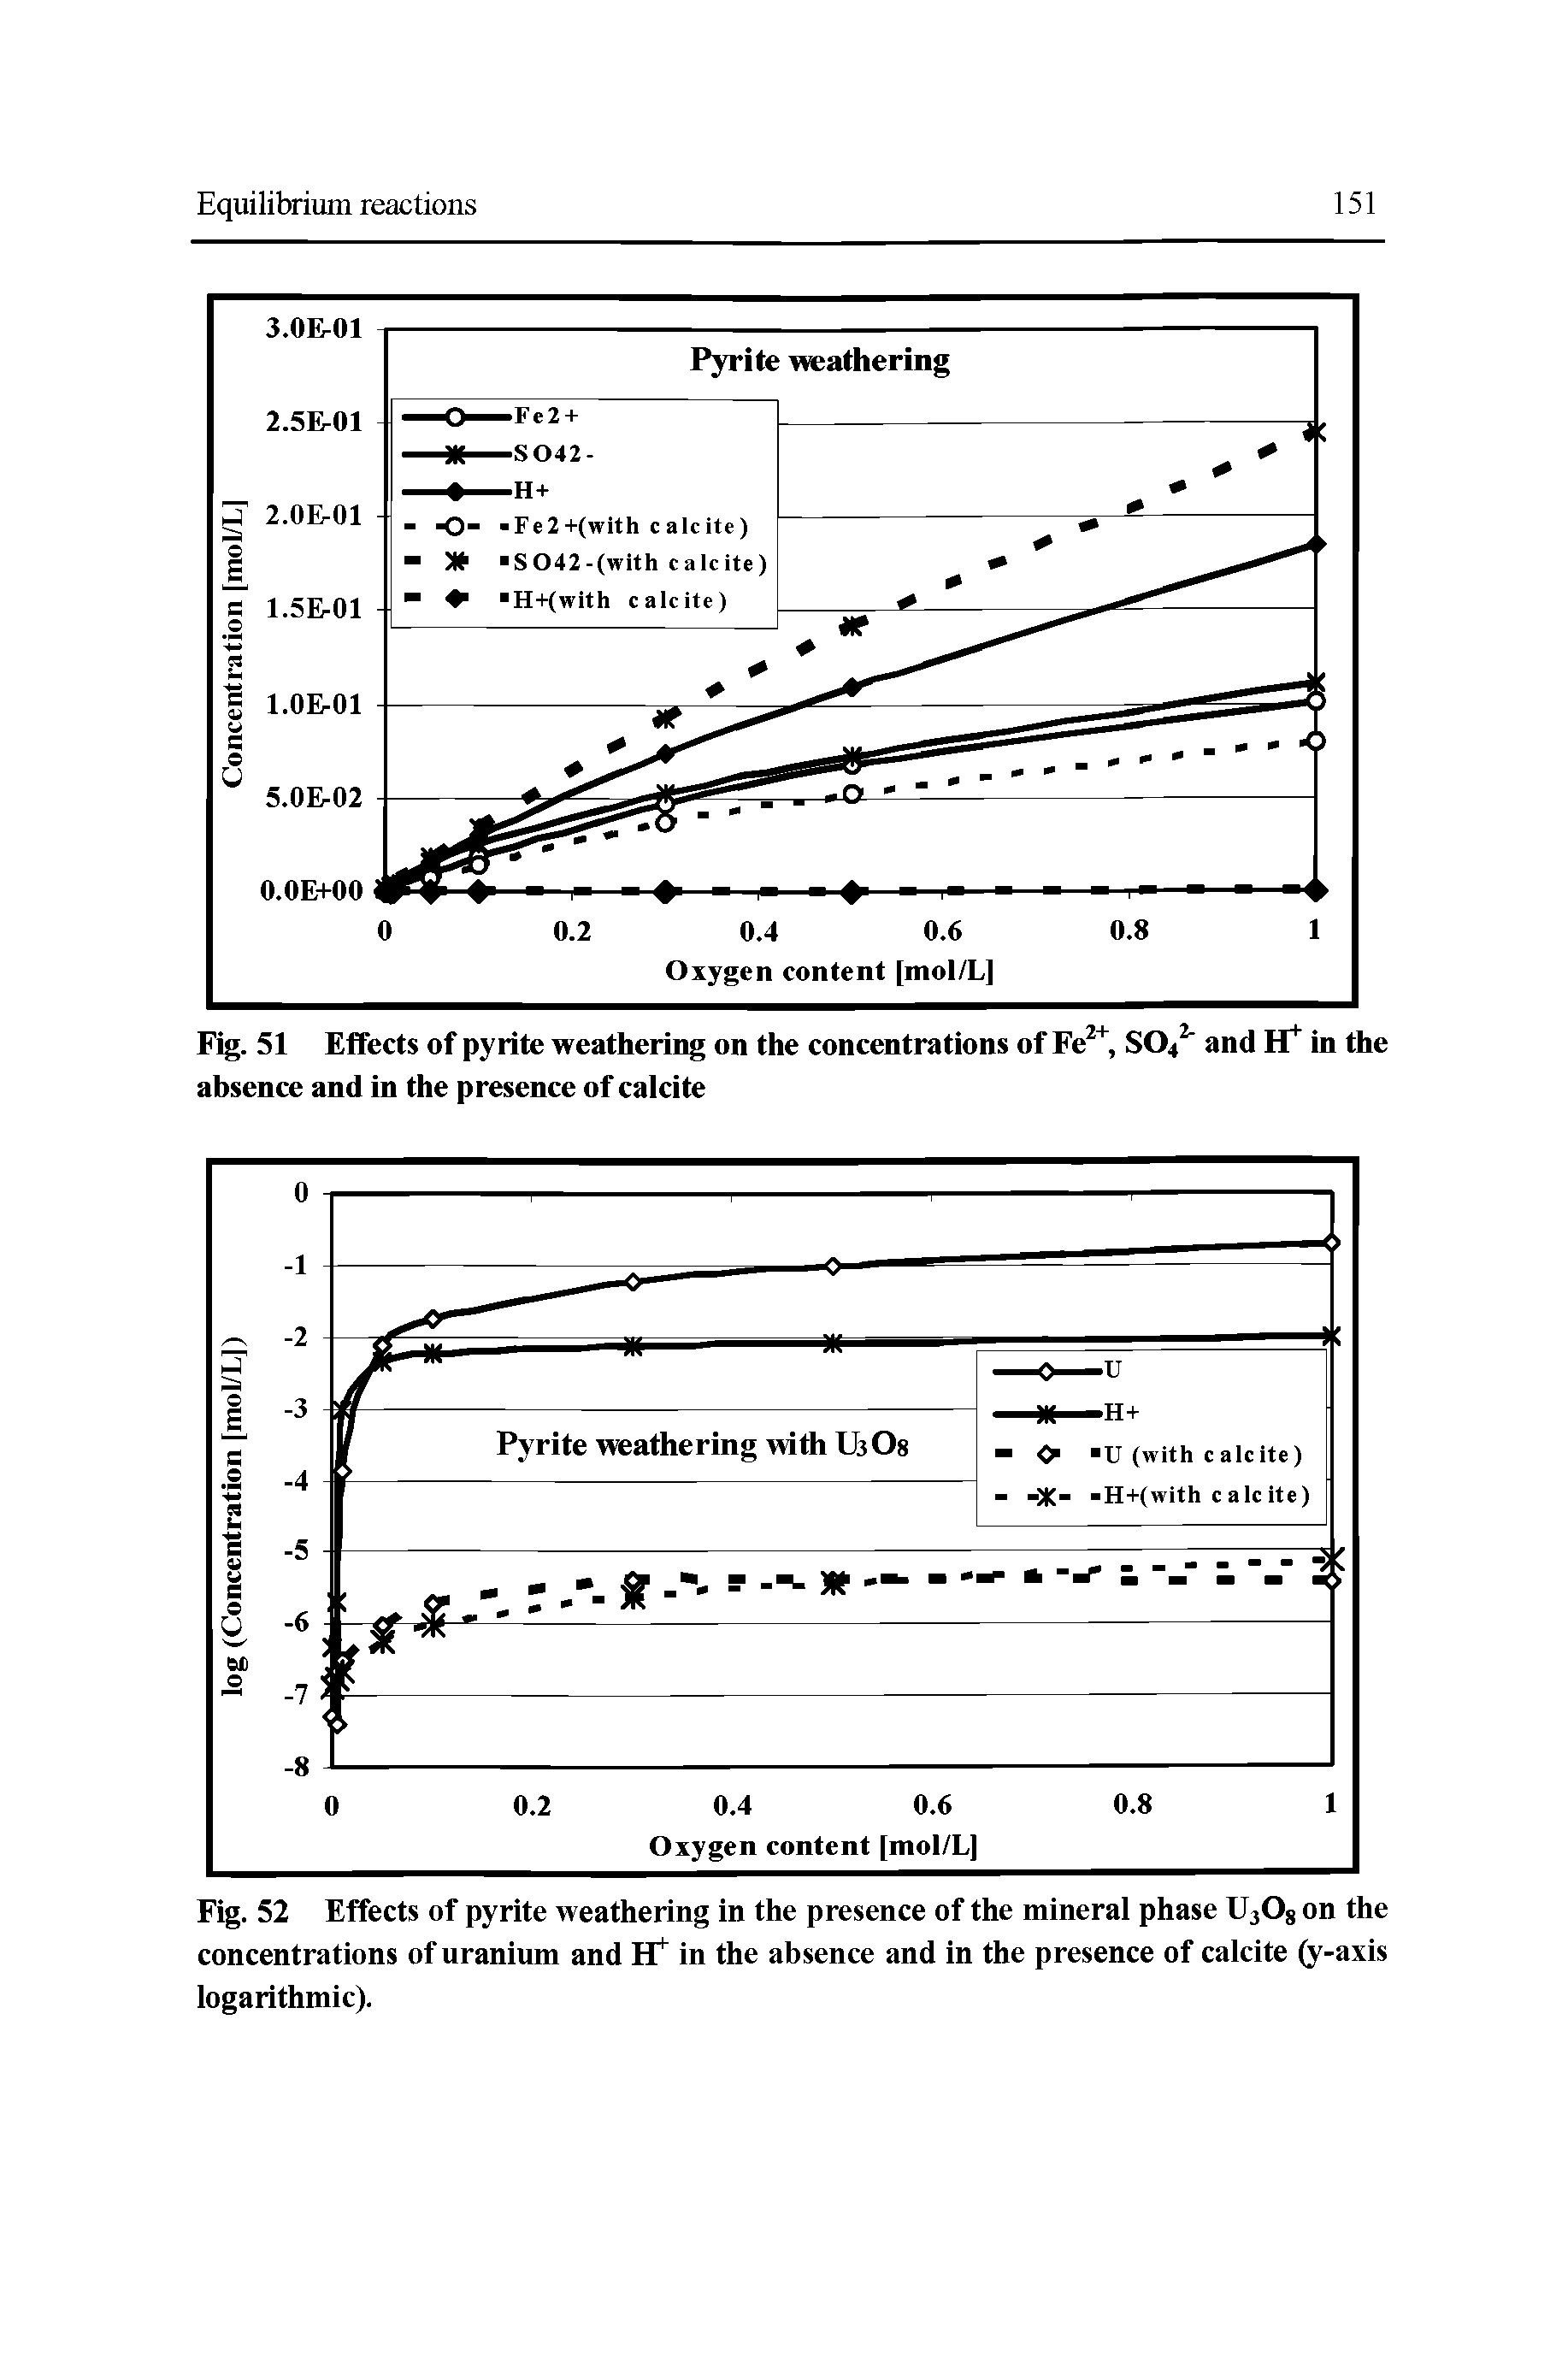 Fig. 51 Effects of pyrite weathering on the concentrations of Fe2+, SO.,2- and H+ in the absence and in the presence of calcite...